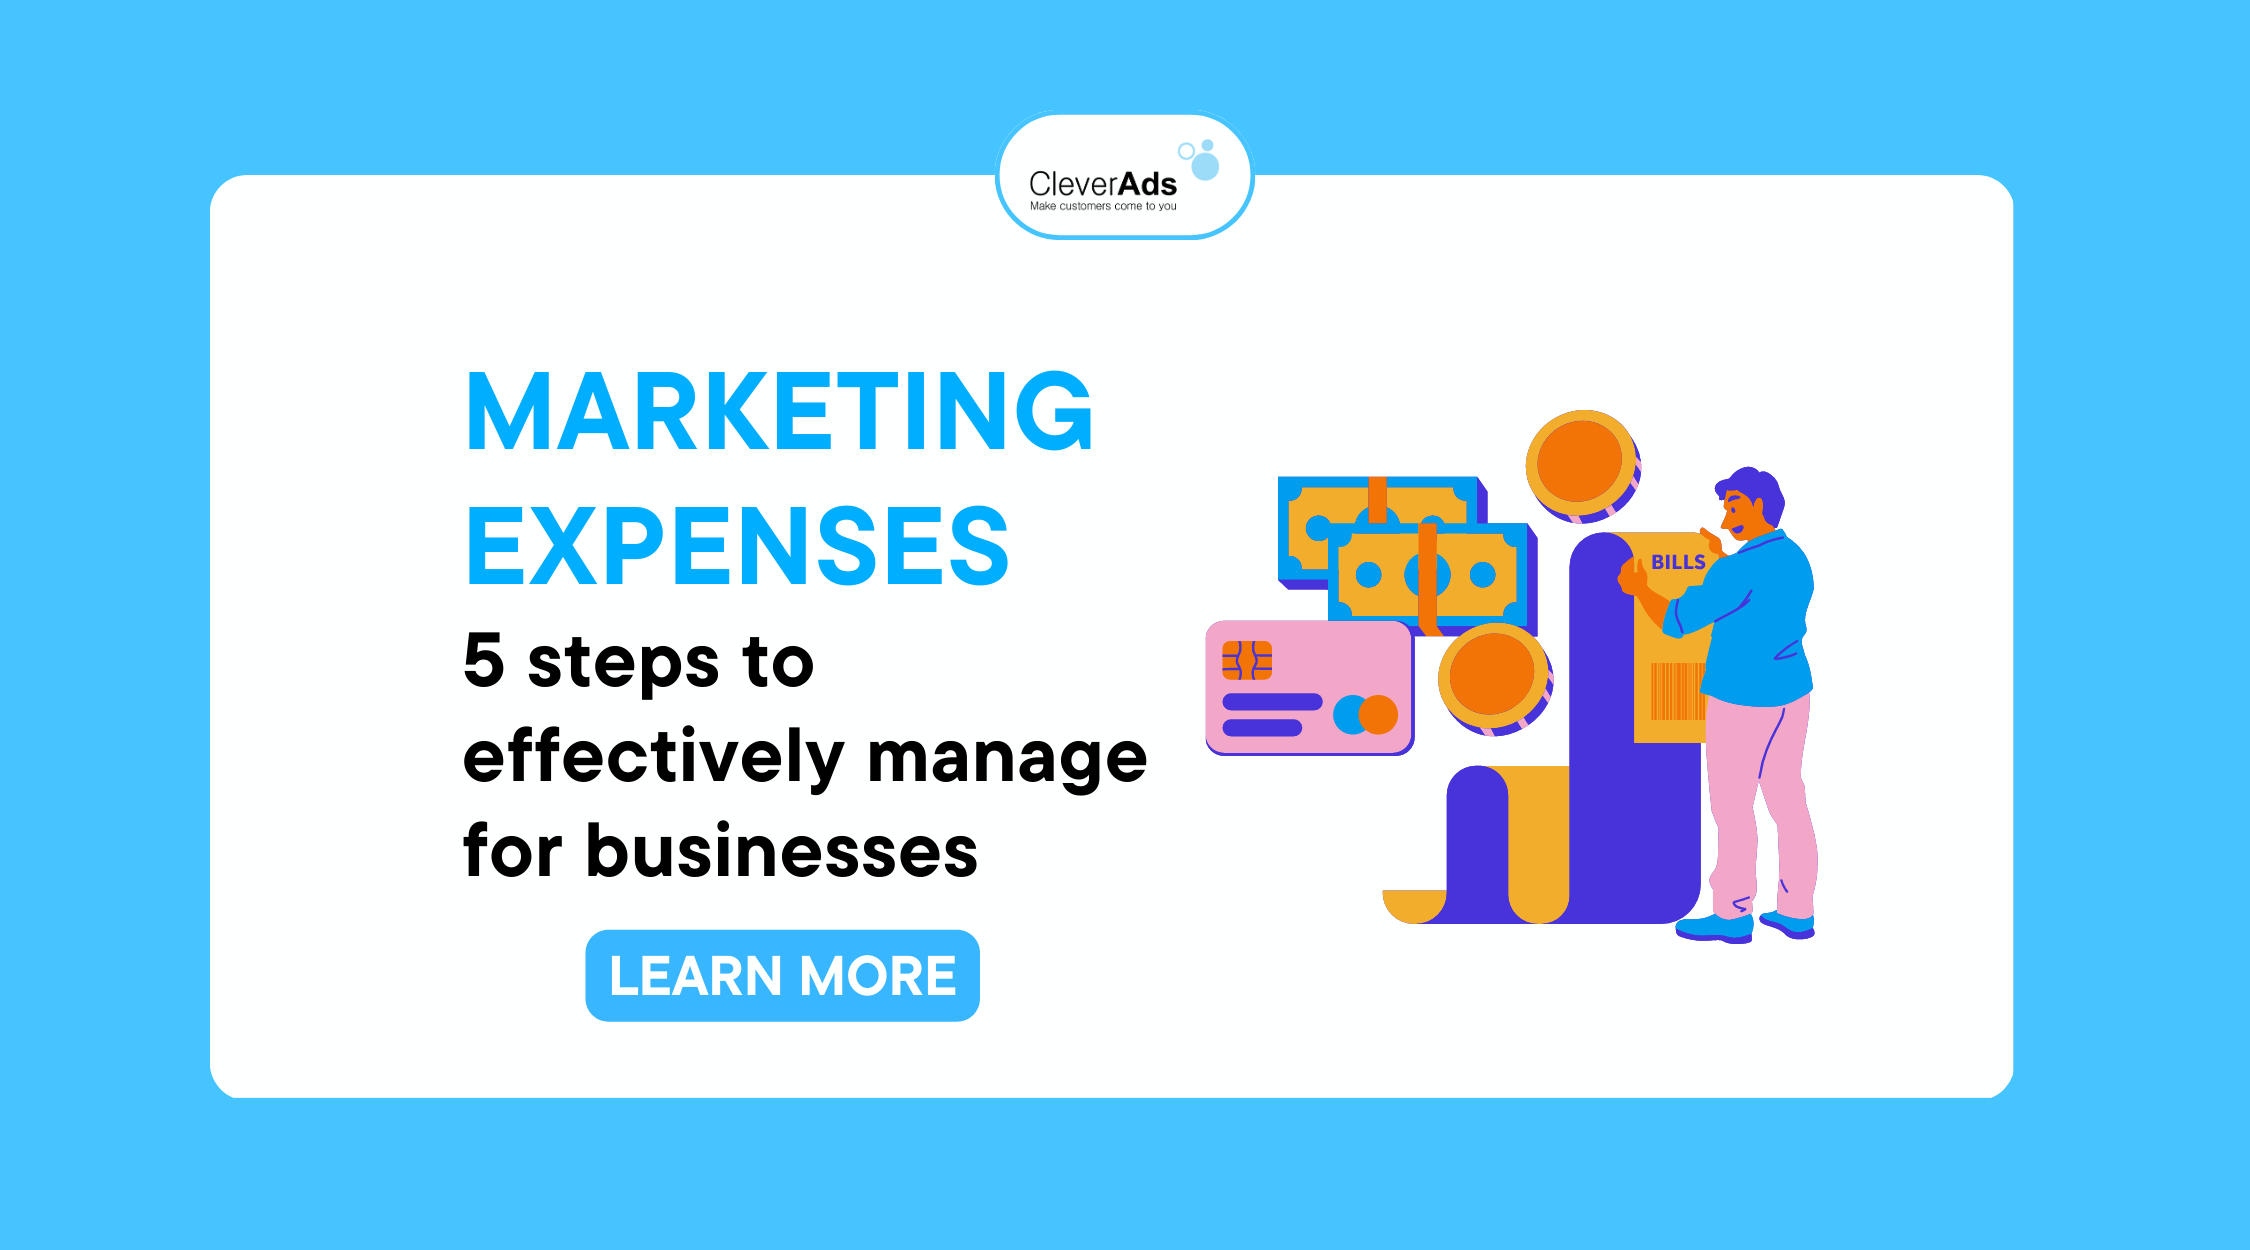 MARKETING EXPENSES: 5 steps to manage for businesses